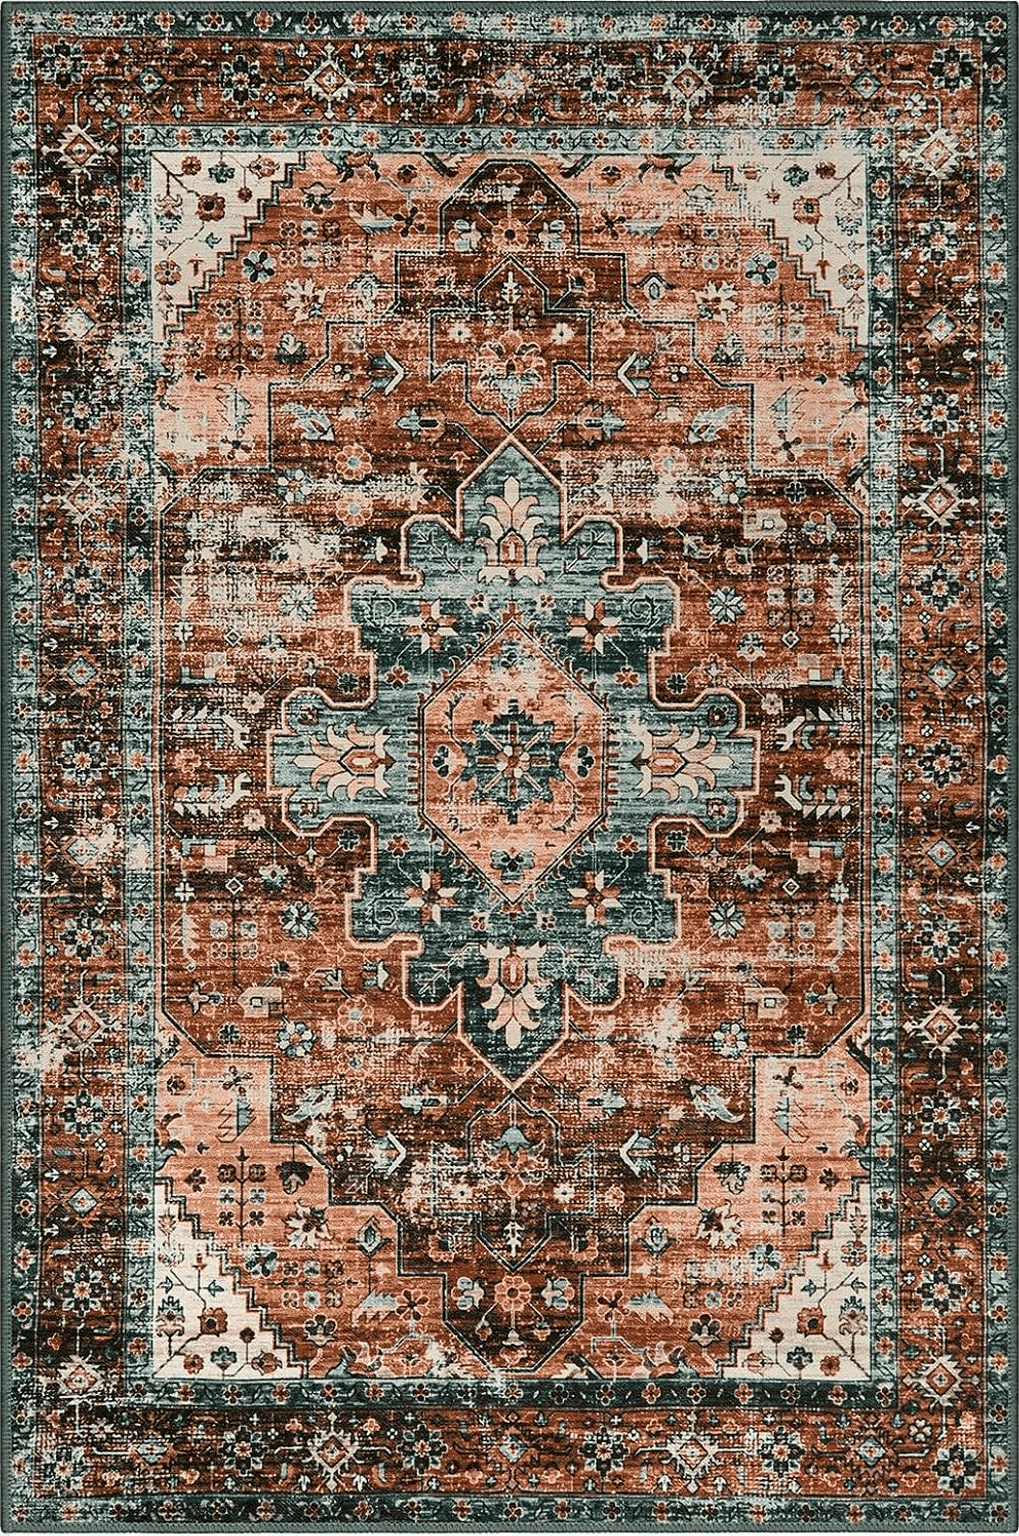 Moynesa Ultra-Thin Vintage Area Rug - 9x12 Large Living Room Rugs for Bedroom Aesthetic, Rugs for Under Dining Room Table, Oriental Medallion Printed Low Pile Carpet for Office Playroom Entryway Dorm